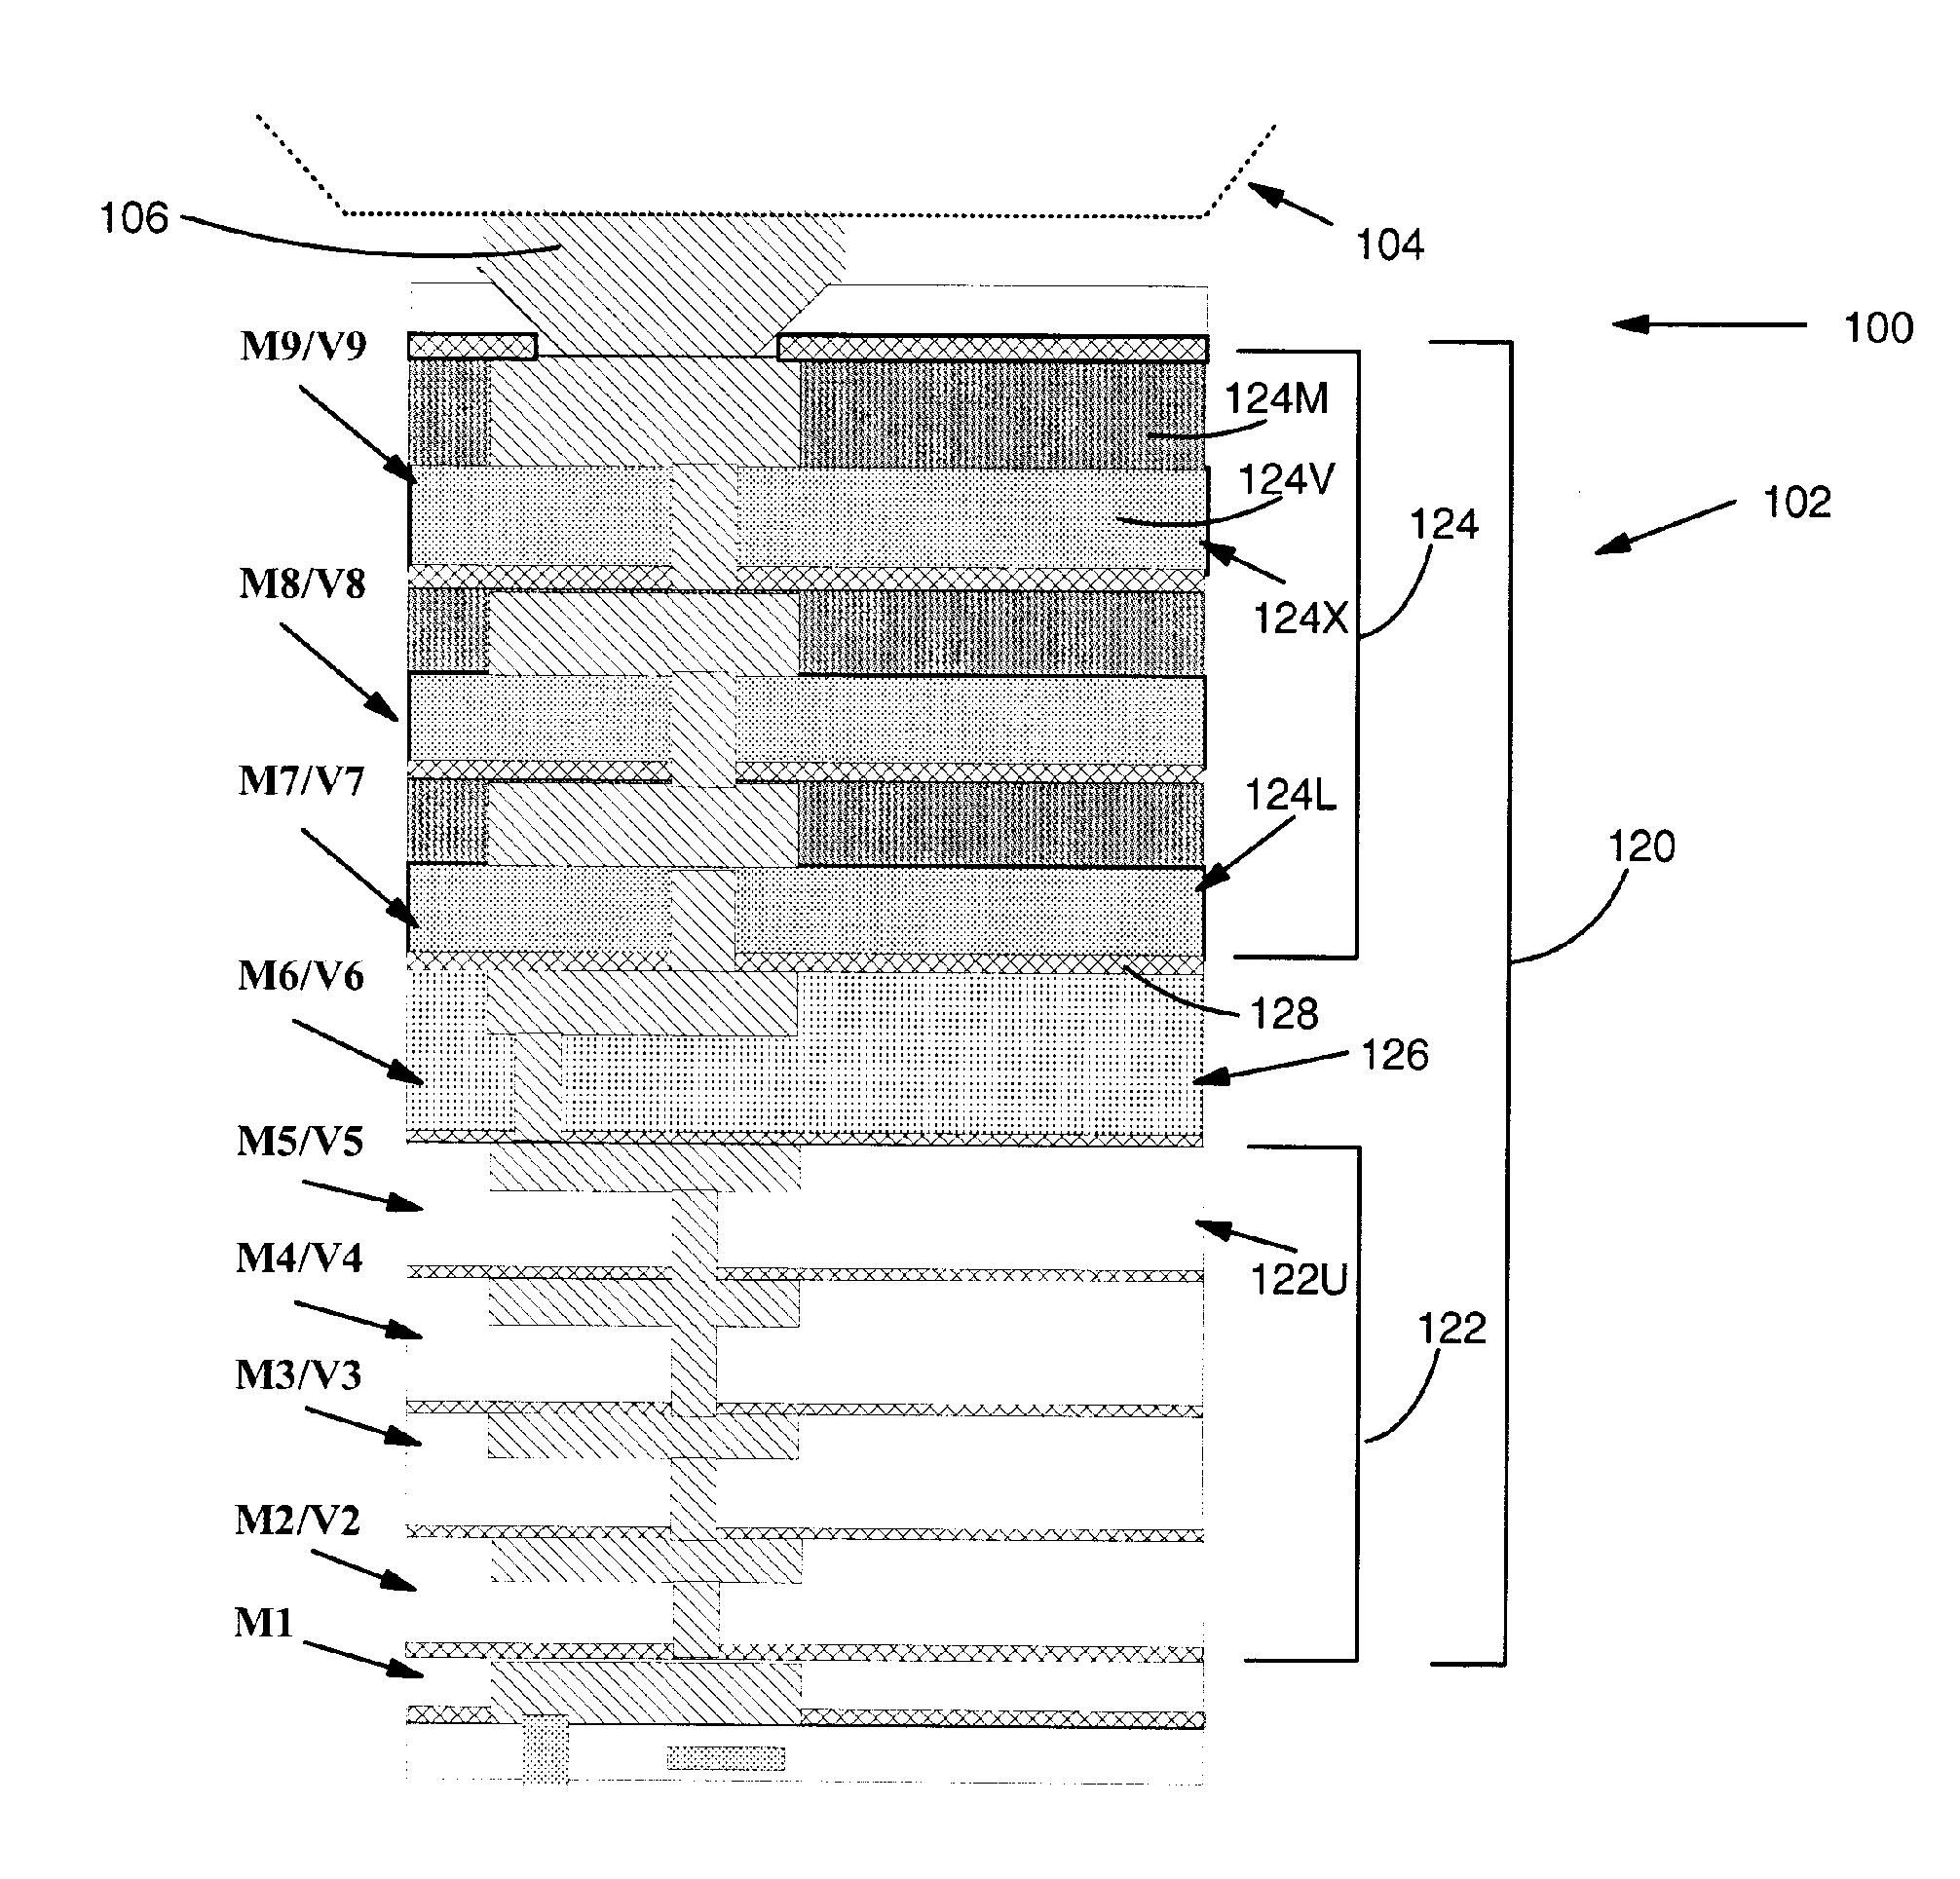 Ild layer with intermediate dielectric constant material immediately below silicon dioxide based ild layer